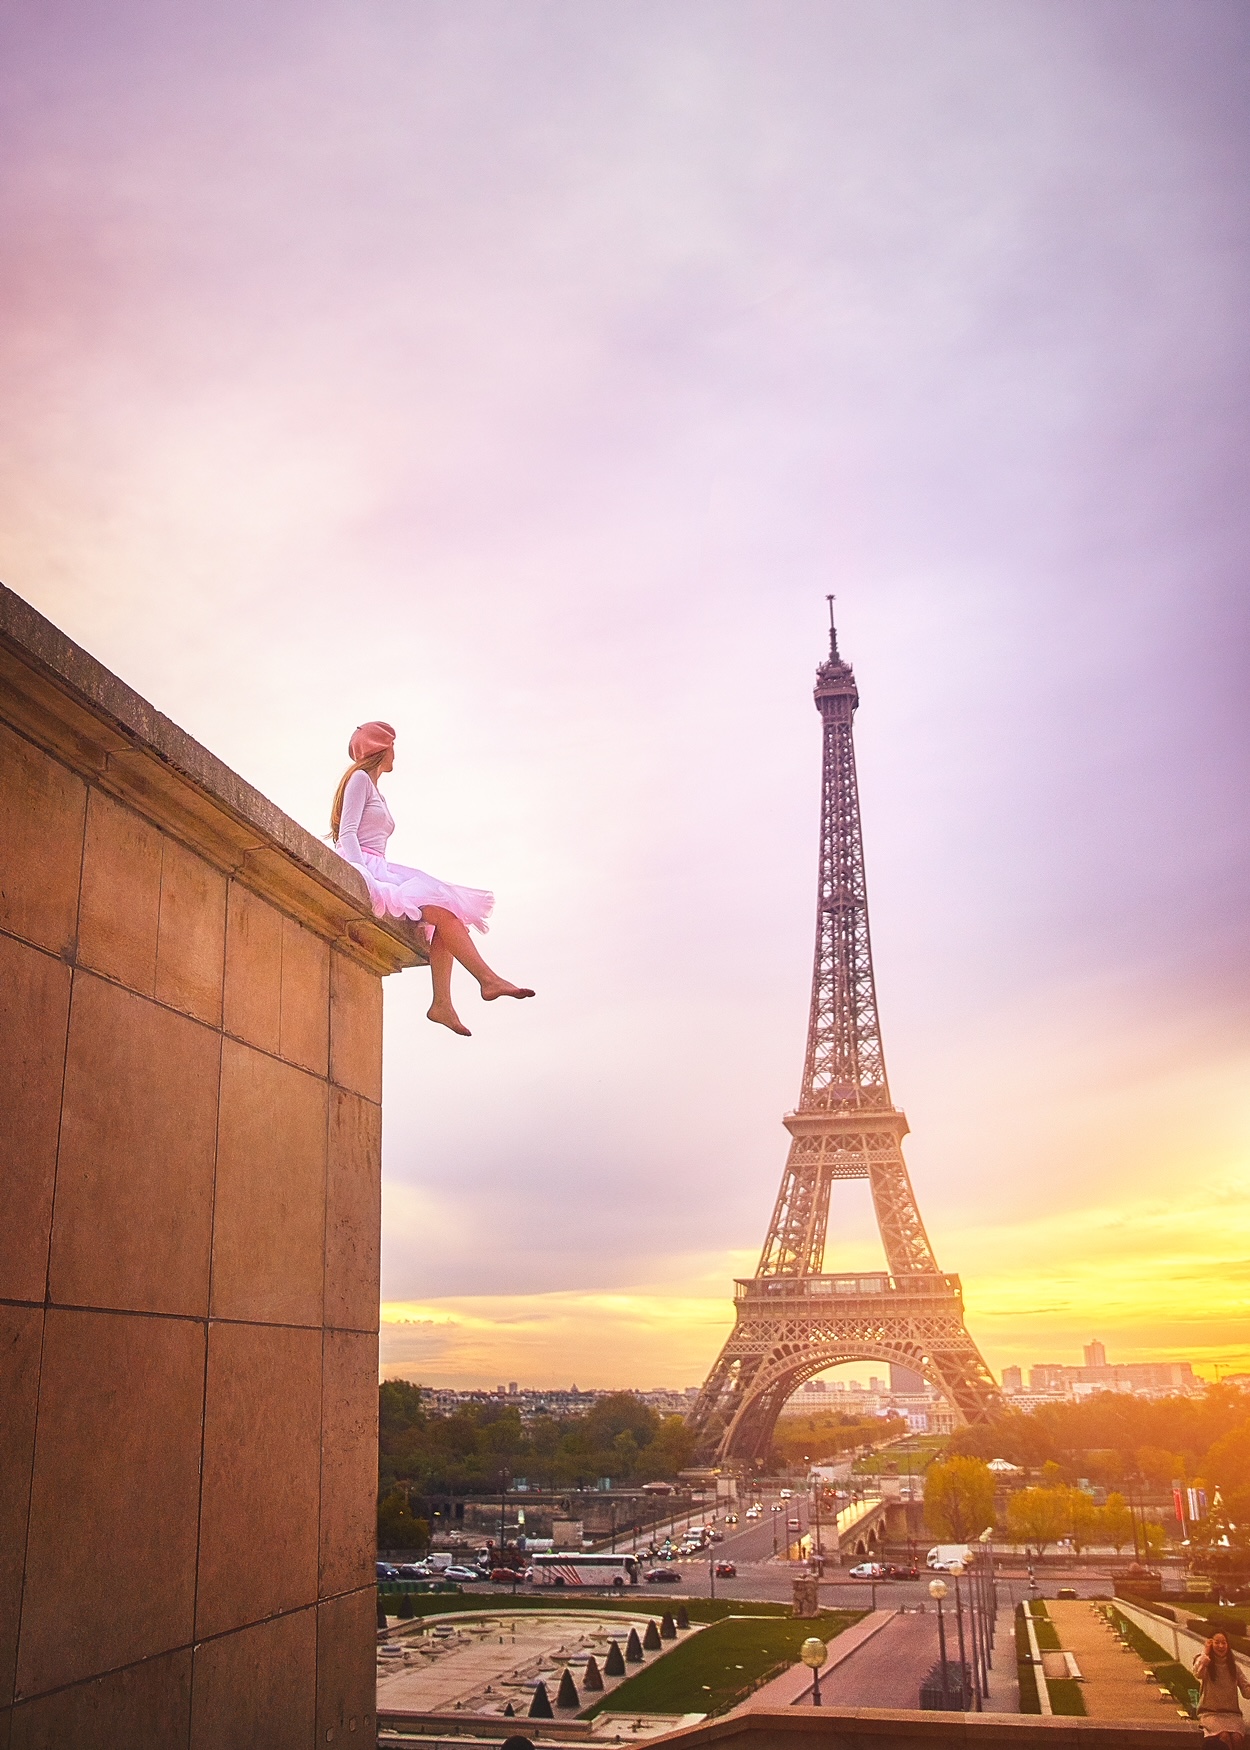 Sunrise over the Eiffel Tower with a woman in a shirt sitting on the edge of Place du Trocadero.